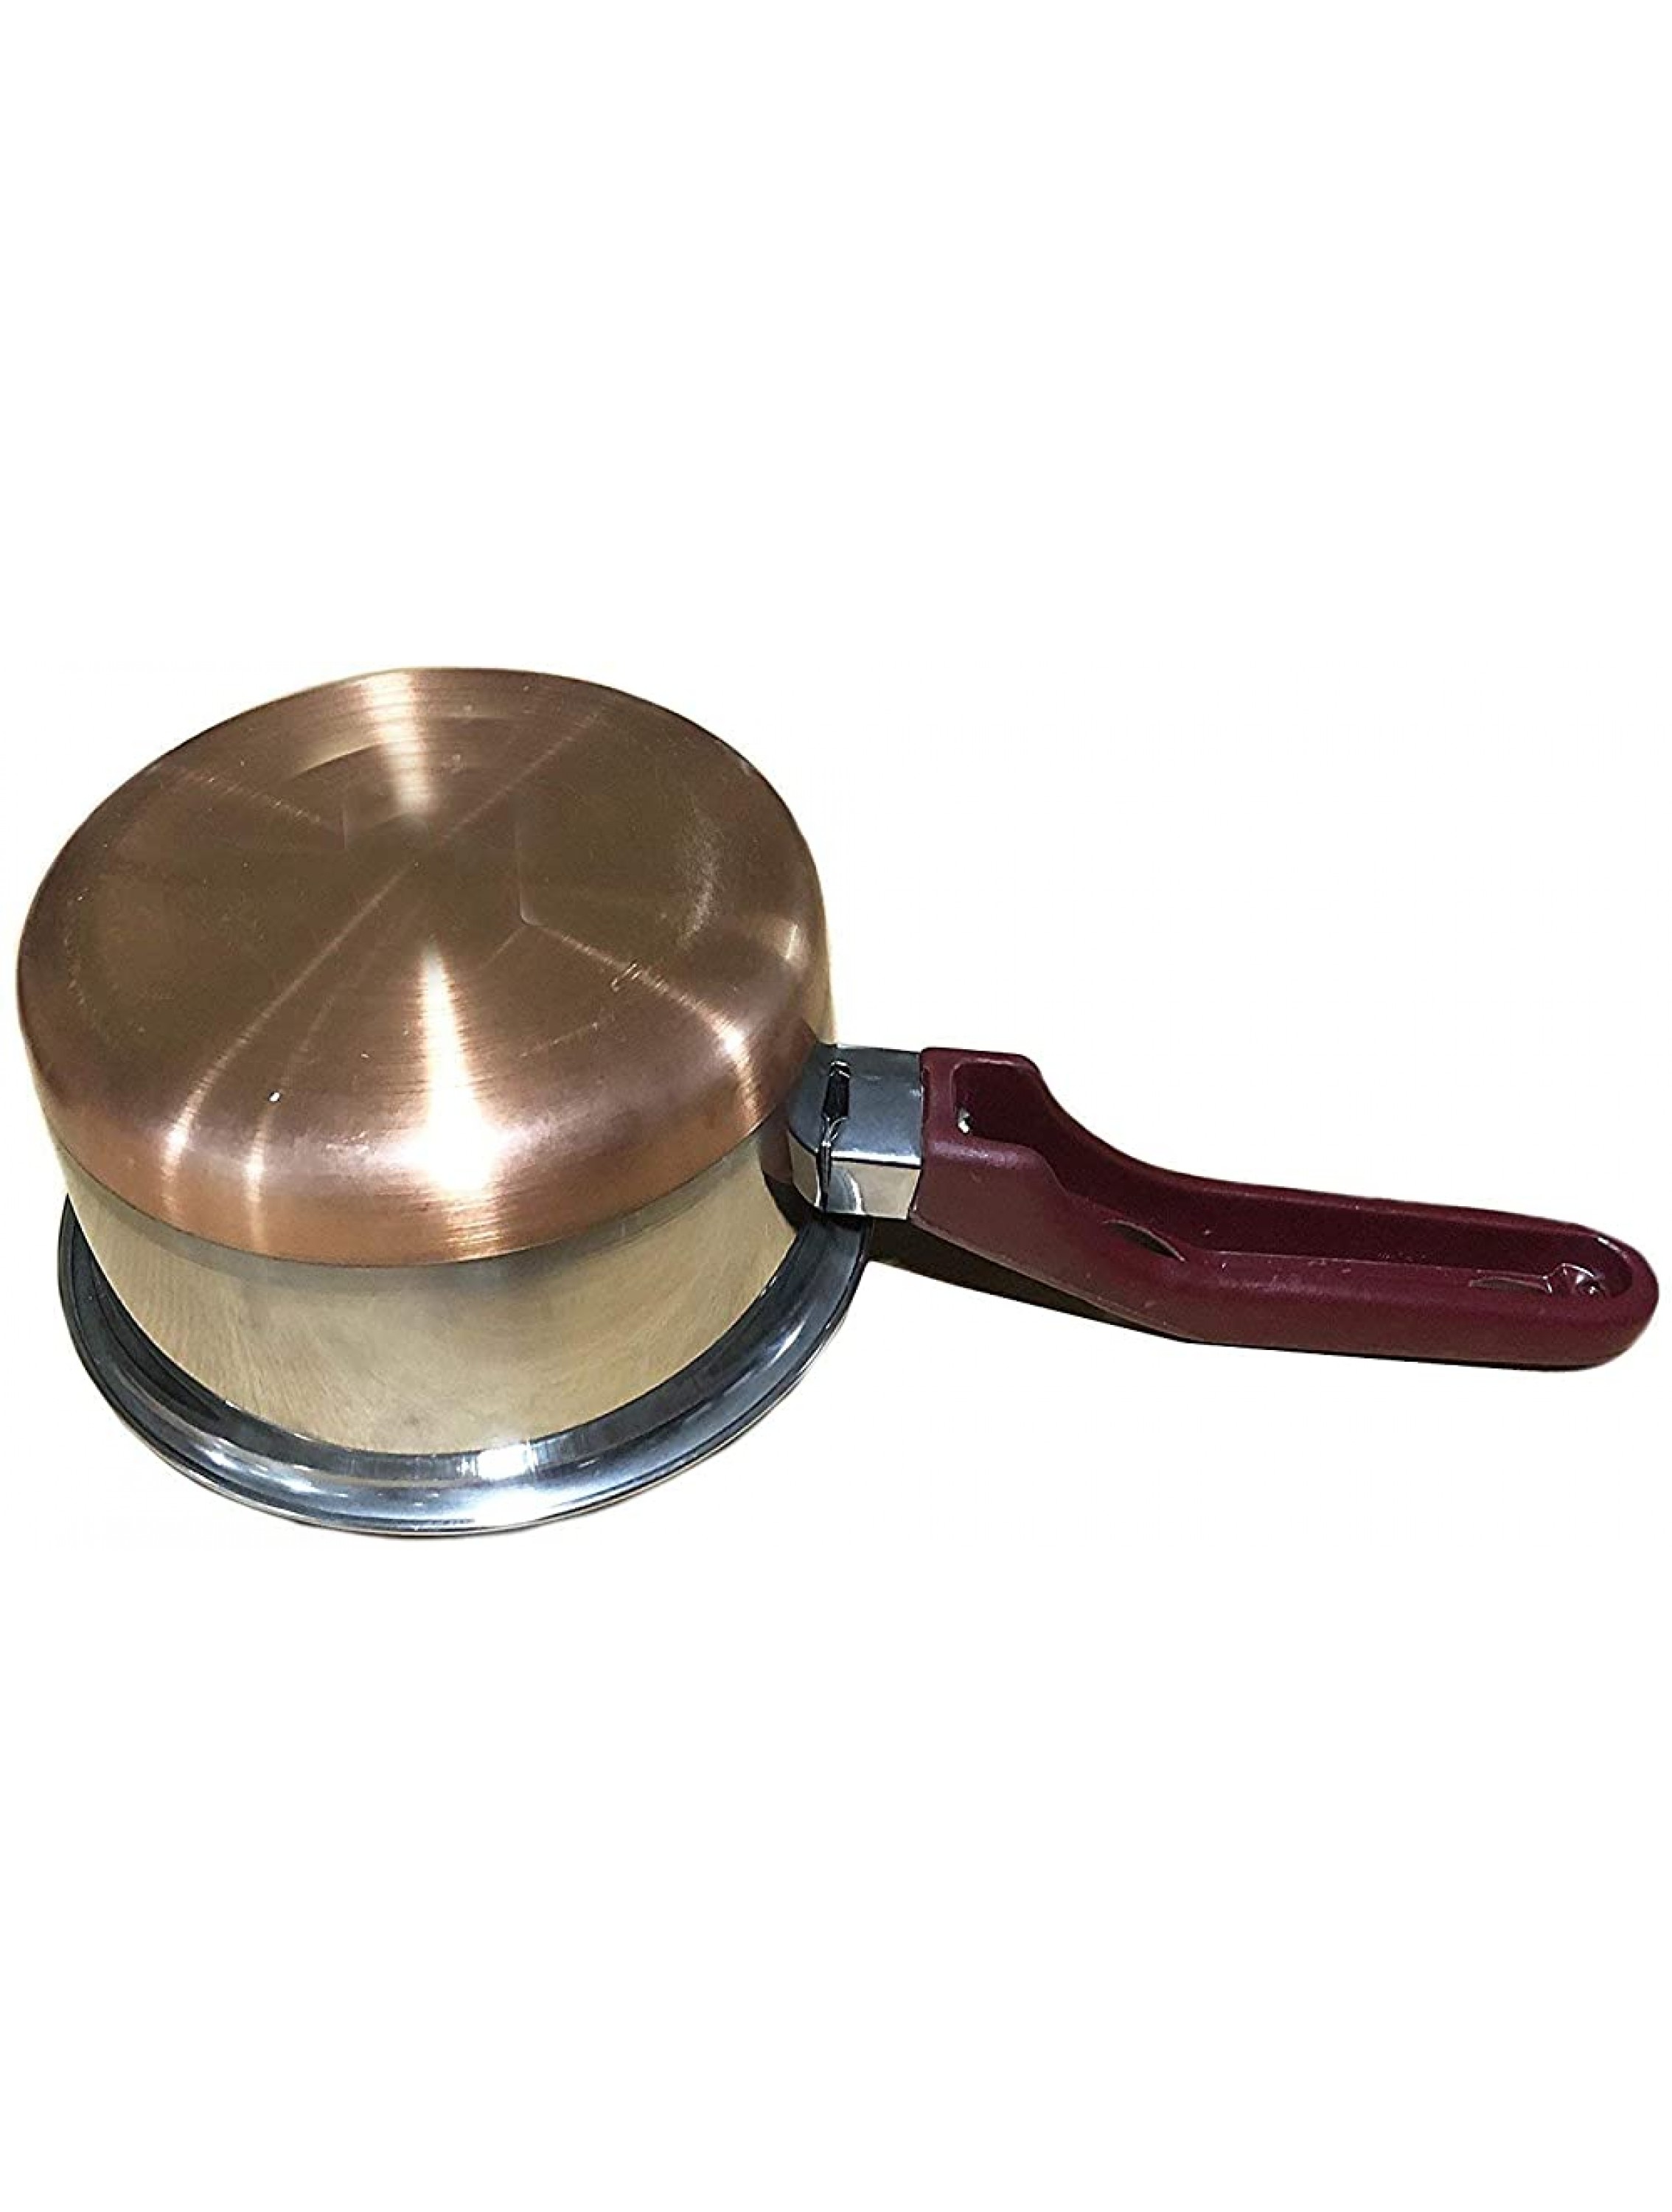 Heavy Stainless Steel Copper Bottom Saucepan Small Size Indian Cookware Tea Coffee Steel Pot - B3OY9O6IV